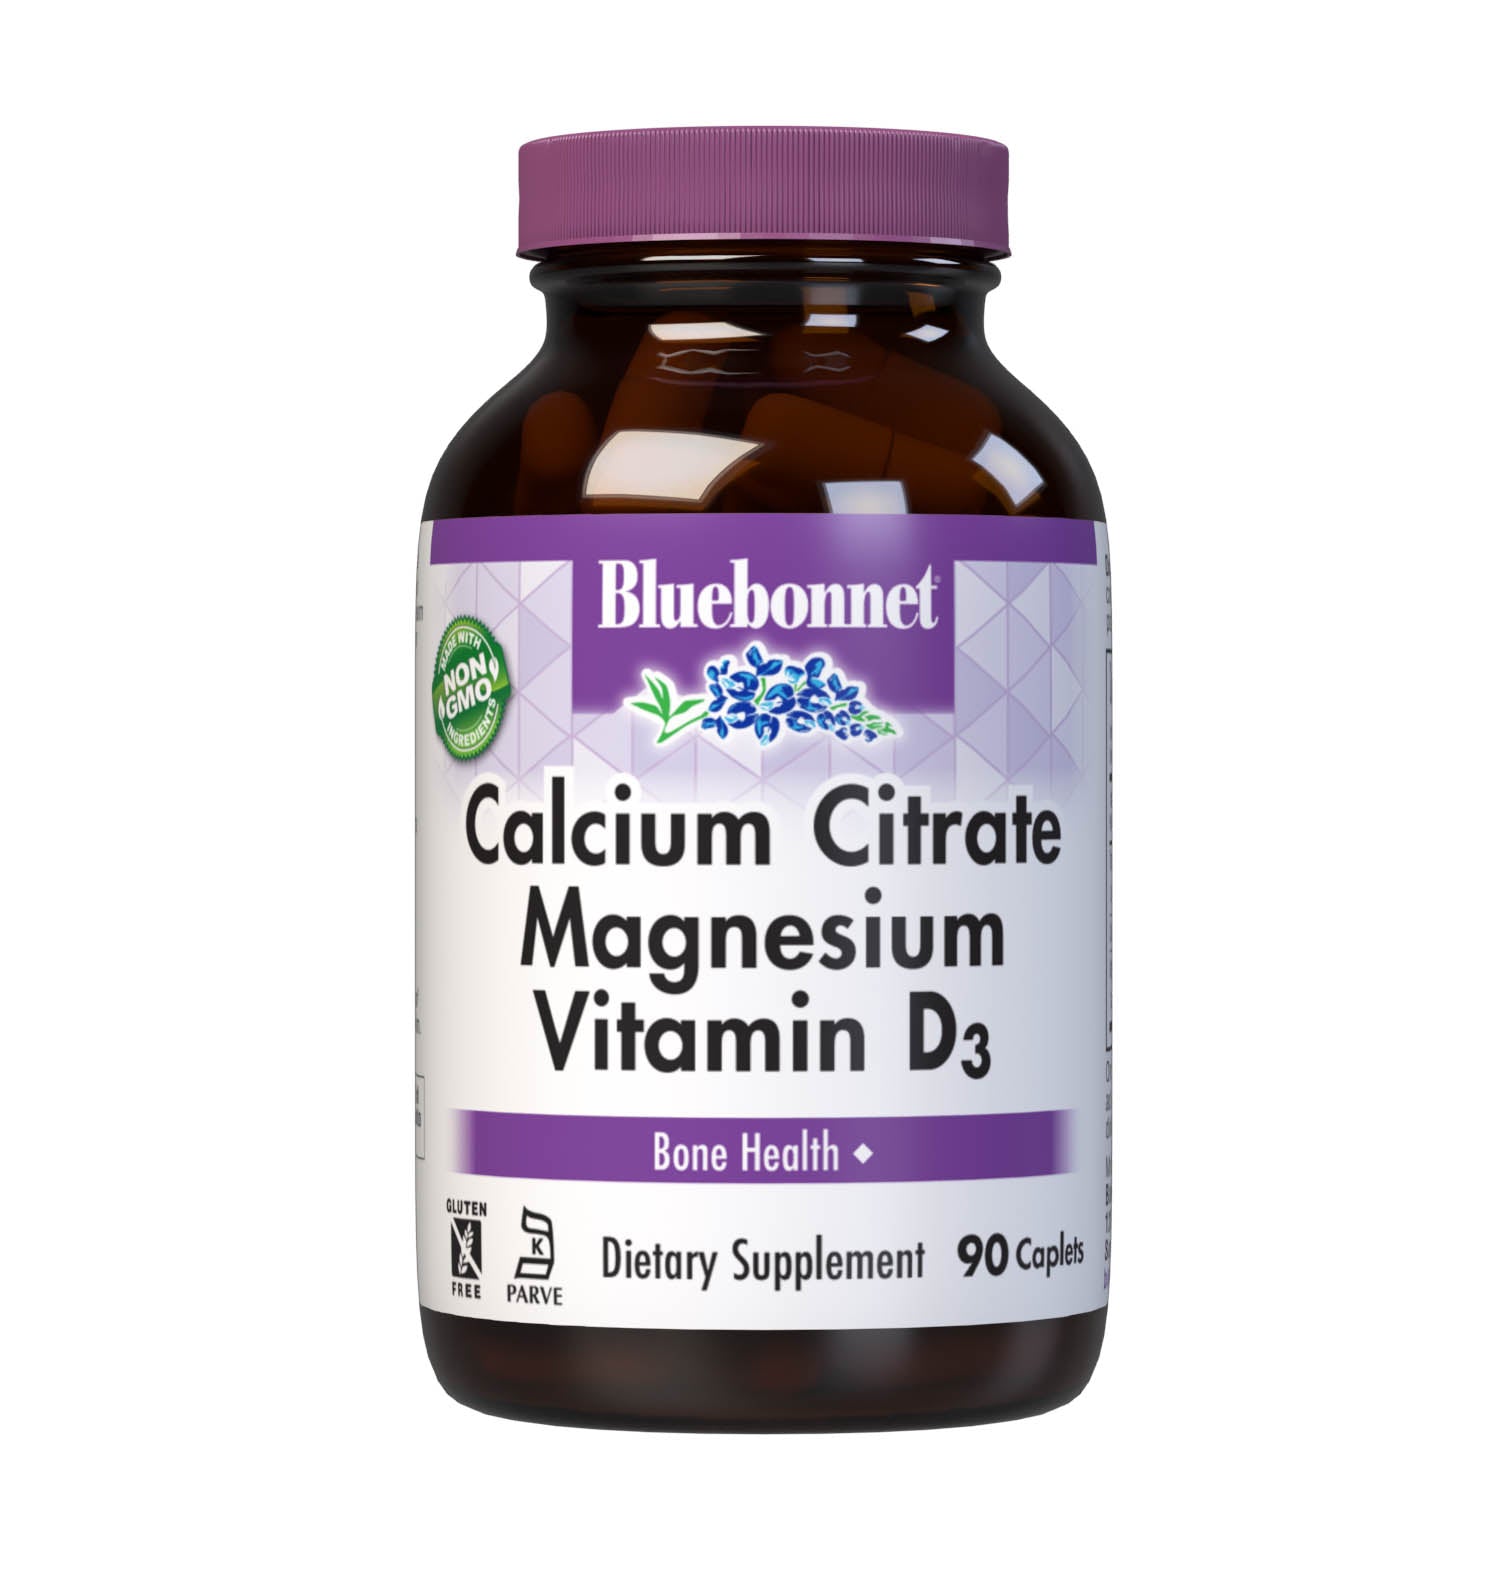 Bluebonnet's Calcium Citrate Magnesium Vitamin D3 90 Caplets are formulated with calcium in a chelate of calcium citrate and magnesium in a chelate of magnesium aspartate along with Vitamin D3 (cholecalciferol) from lanolin for strong, healthy bones. #size_90 count